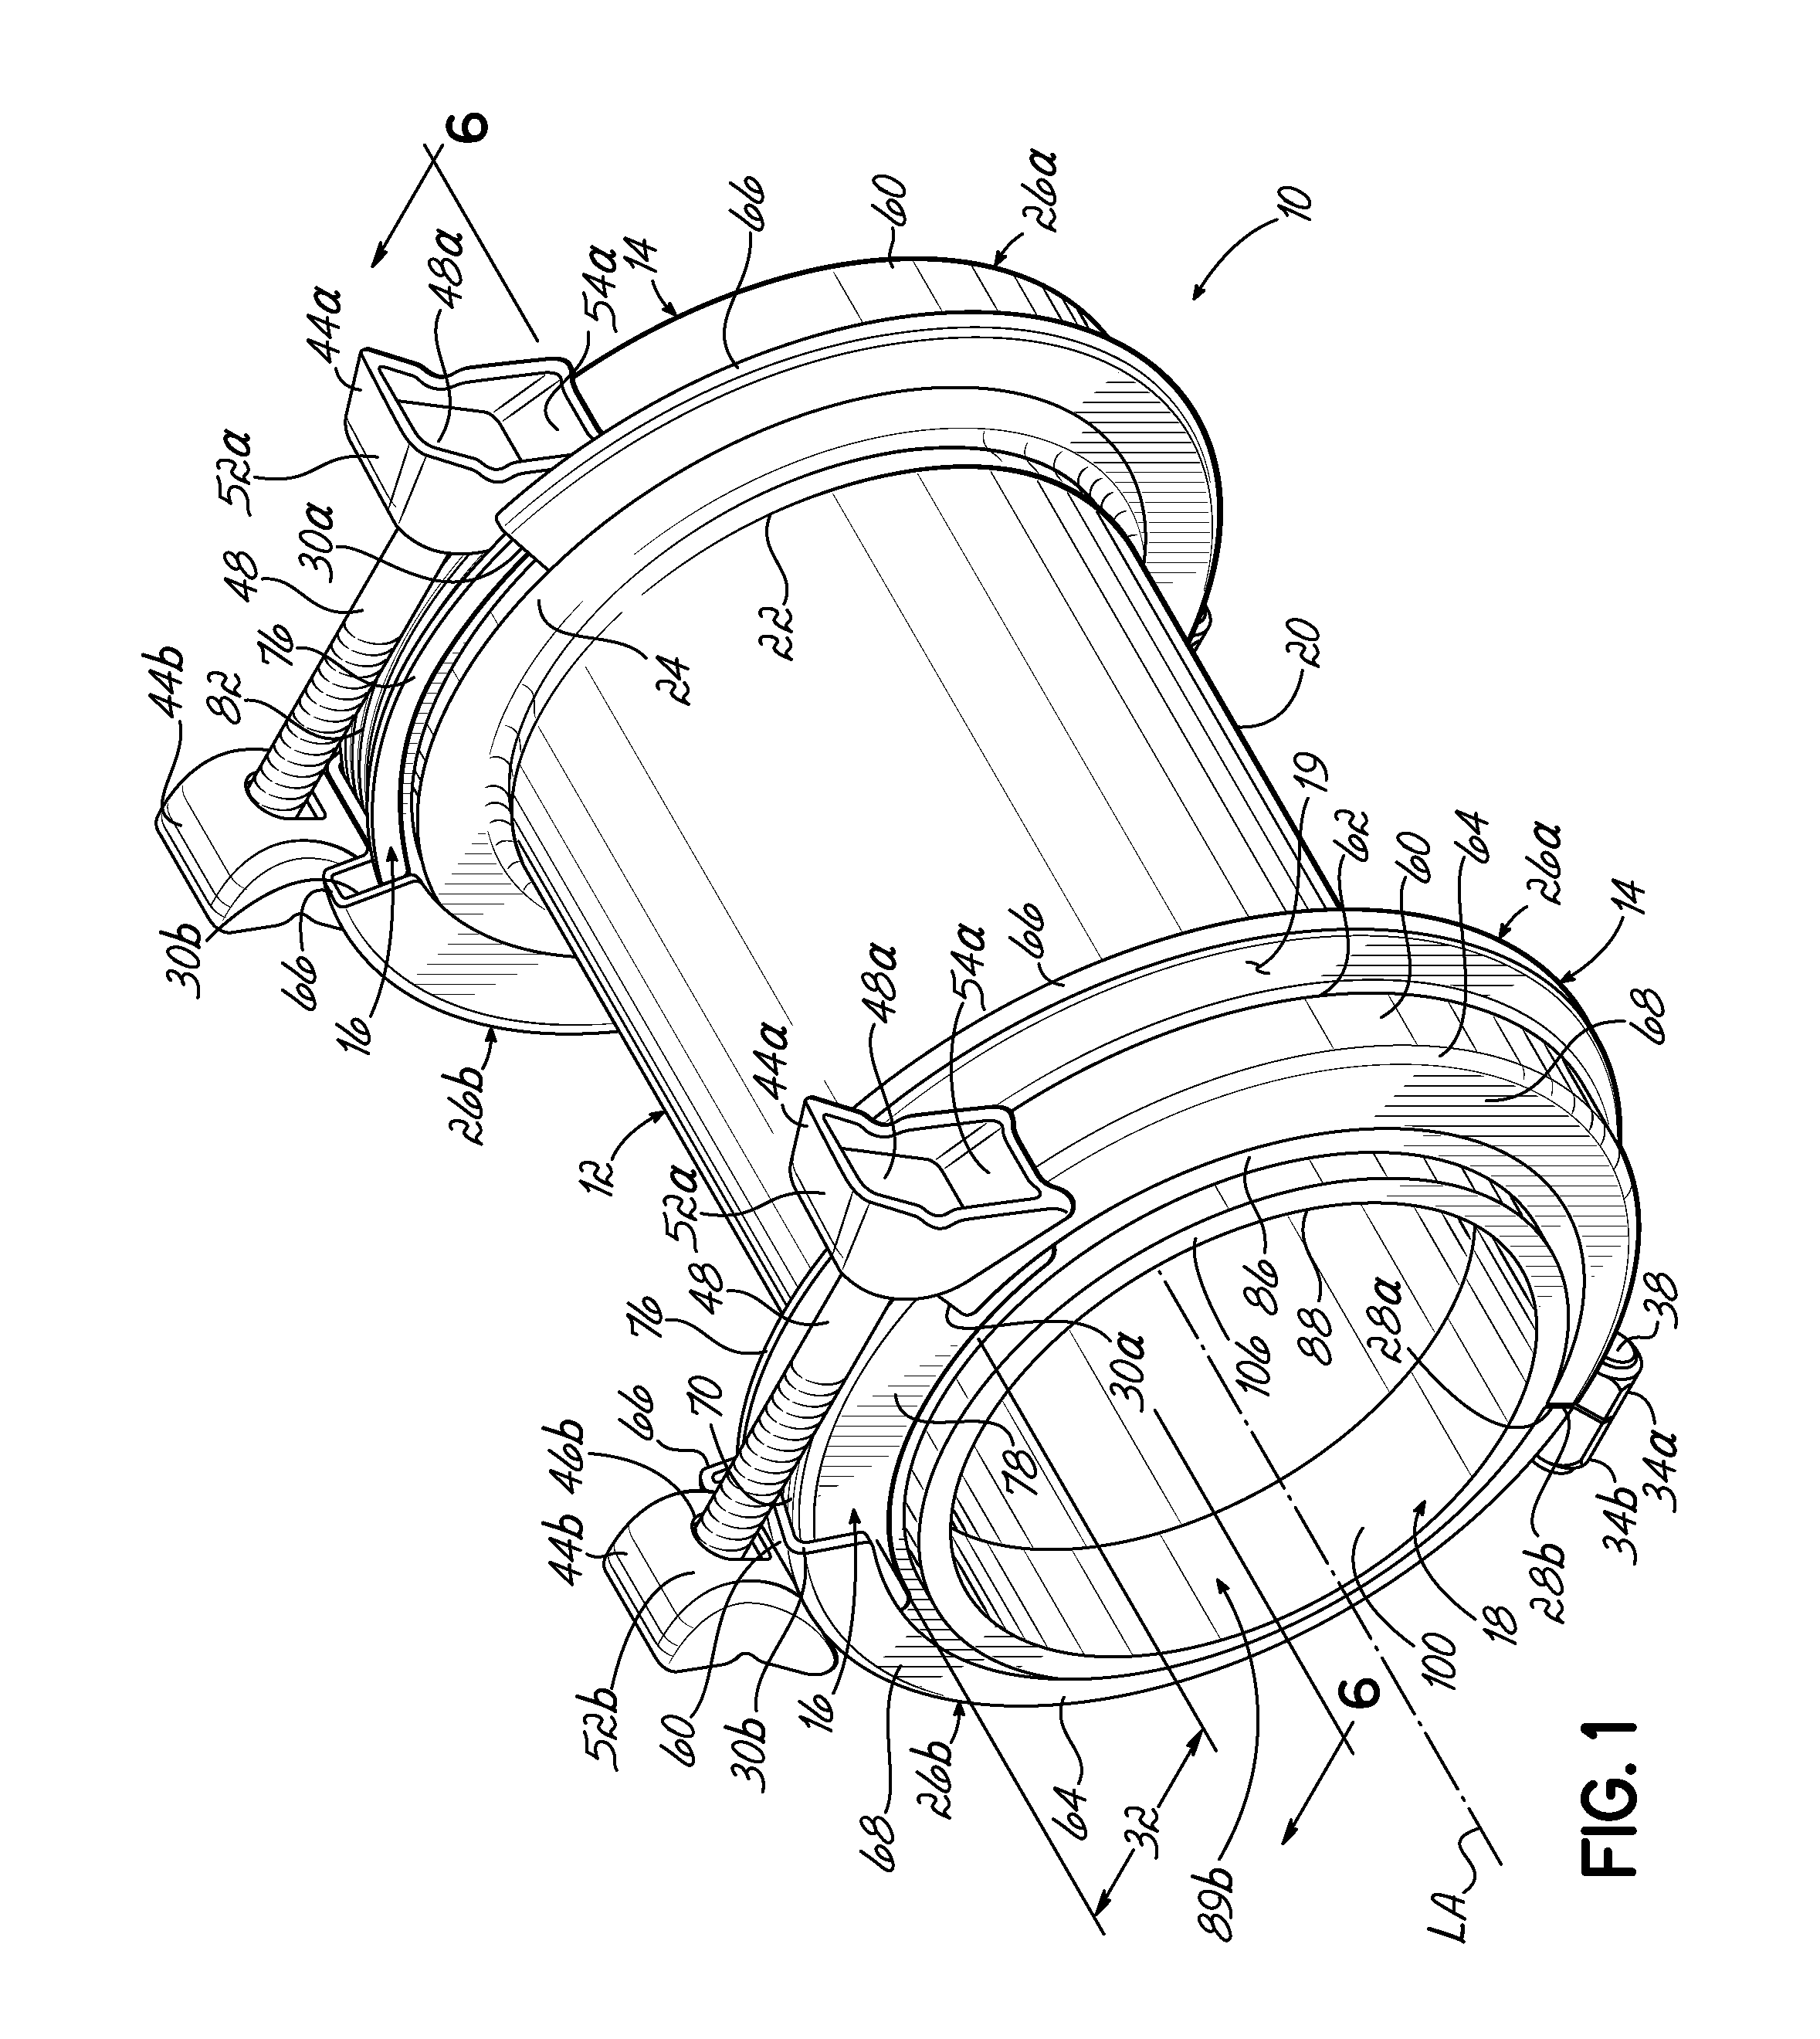 Split-ring gland pipe coupling with corrugated armor and annular gasket having pressure assist slot